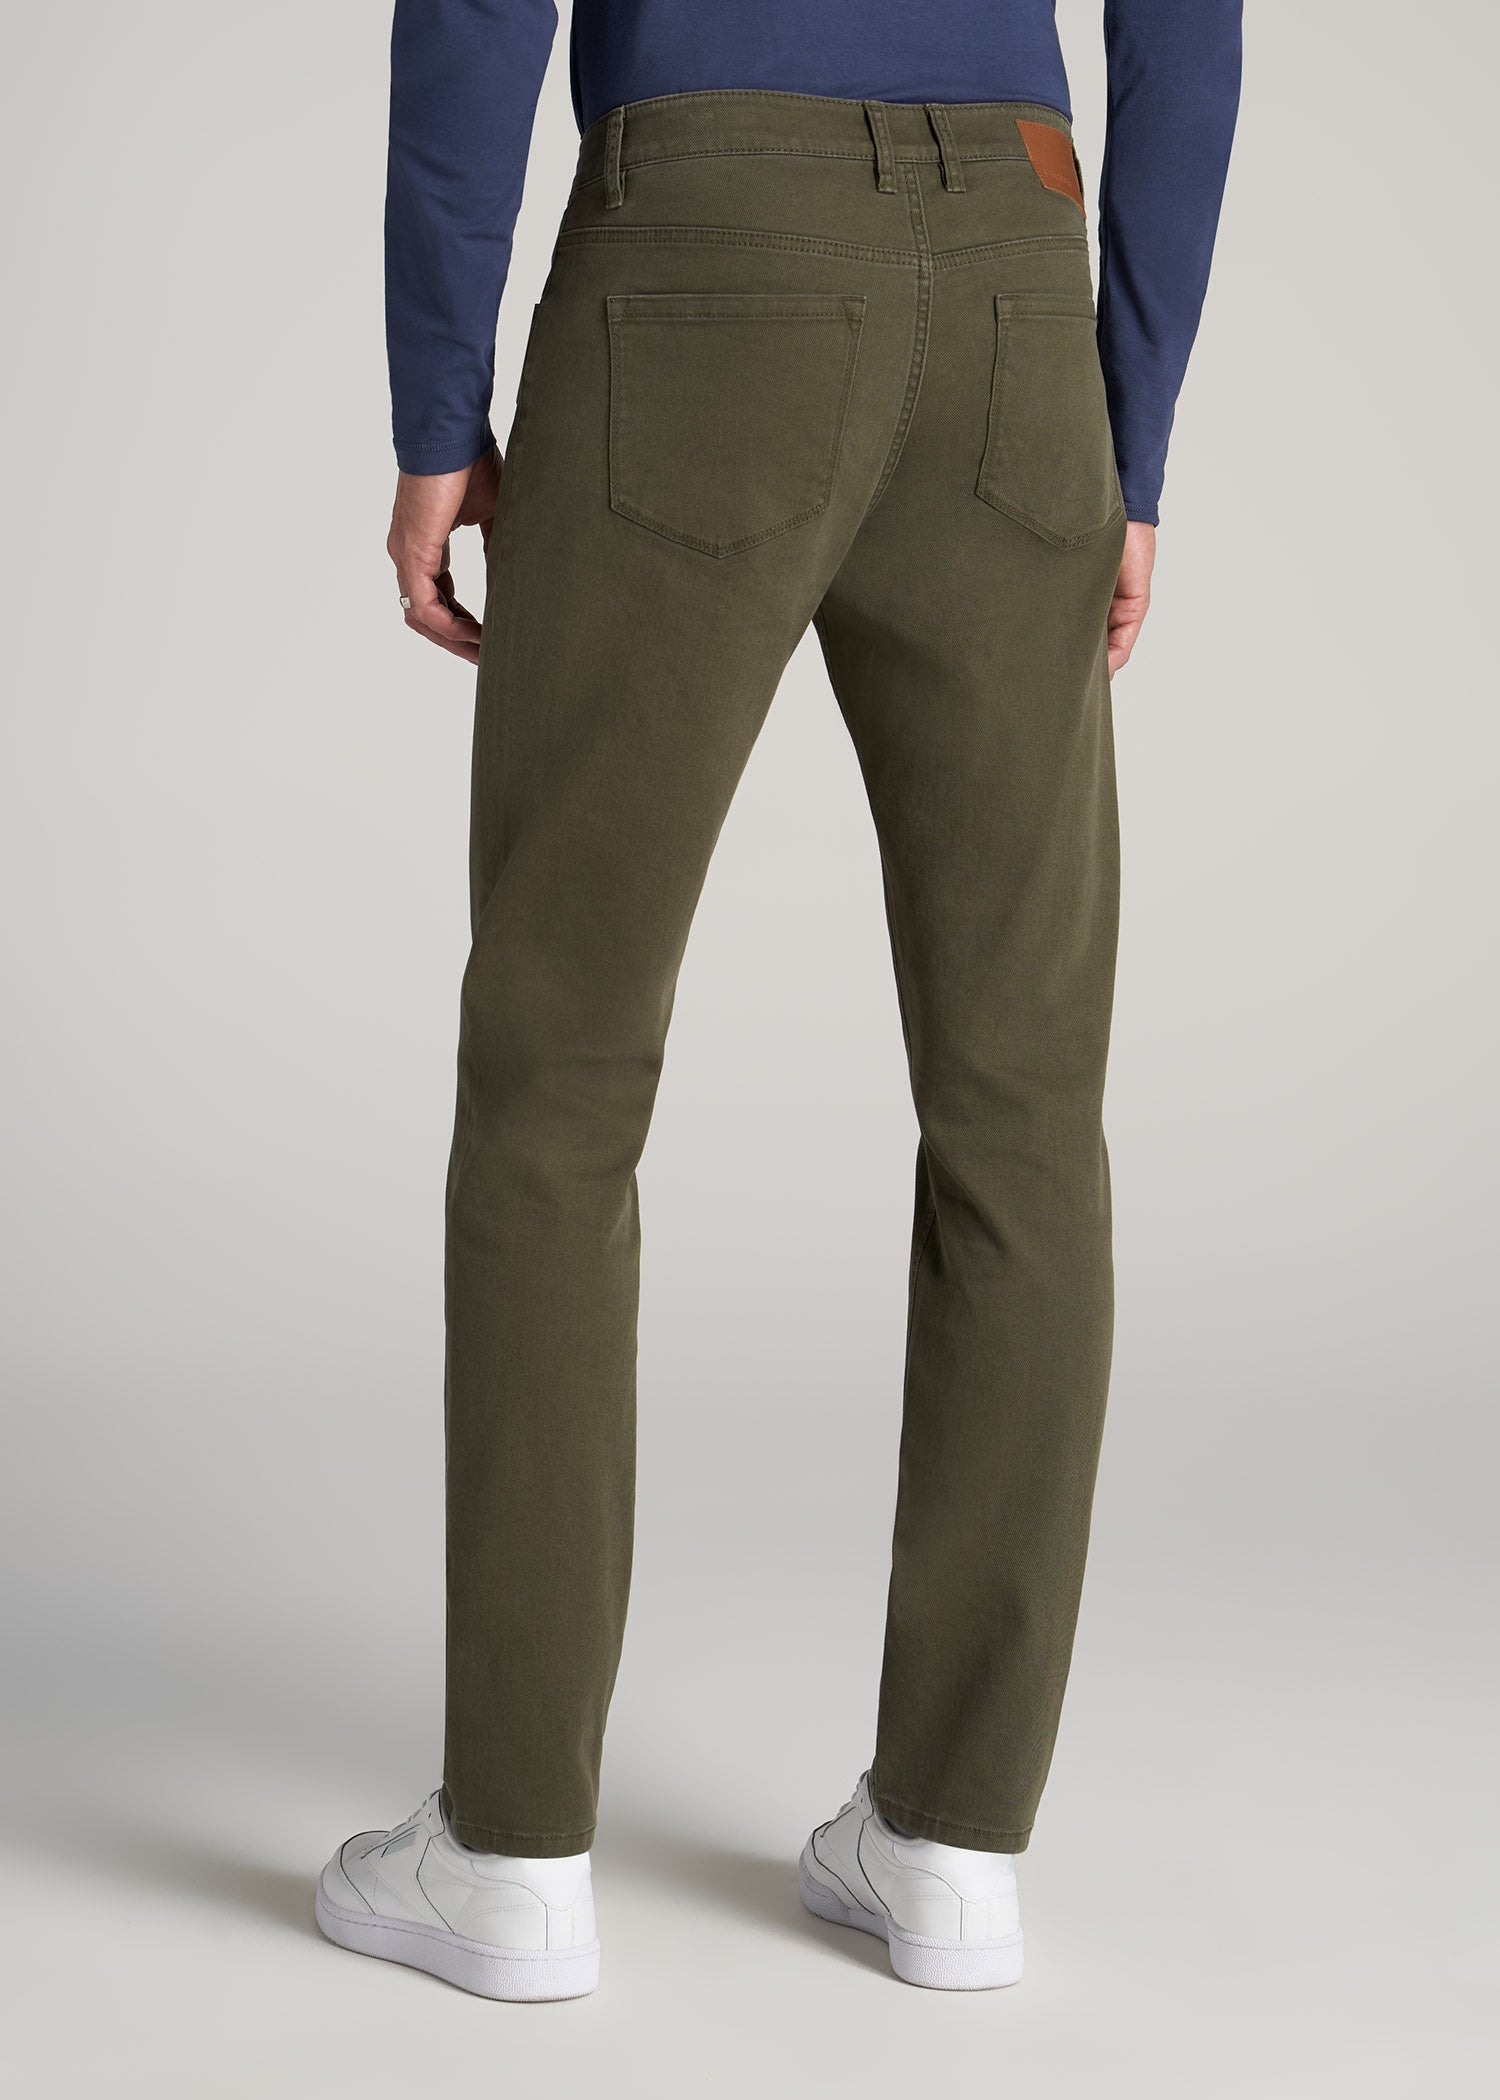 Buy Louis Philippe Men Olive Green Slim Fit Self Design Formal Trousers -  Trousers for Men 8294997 | Myntra